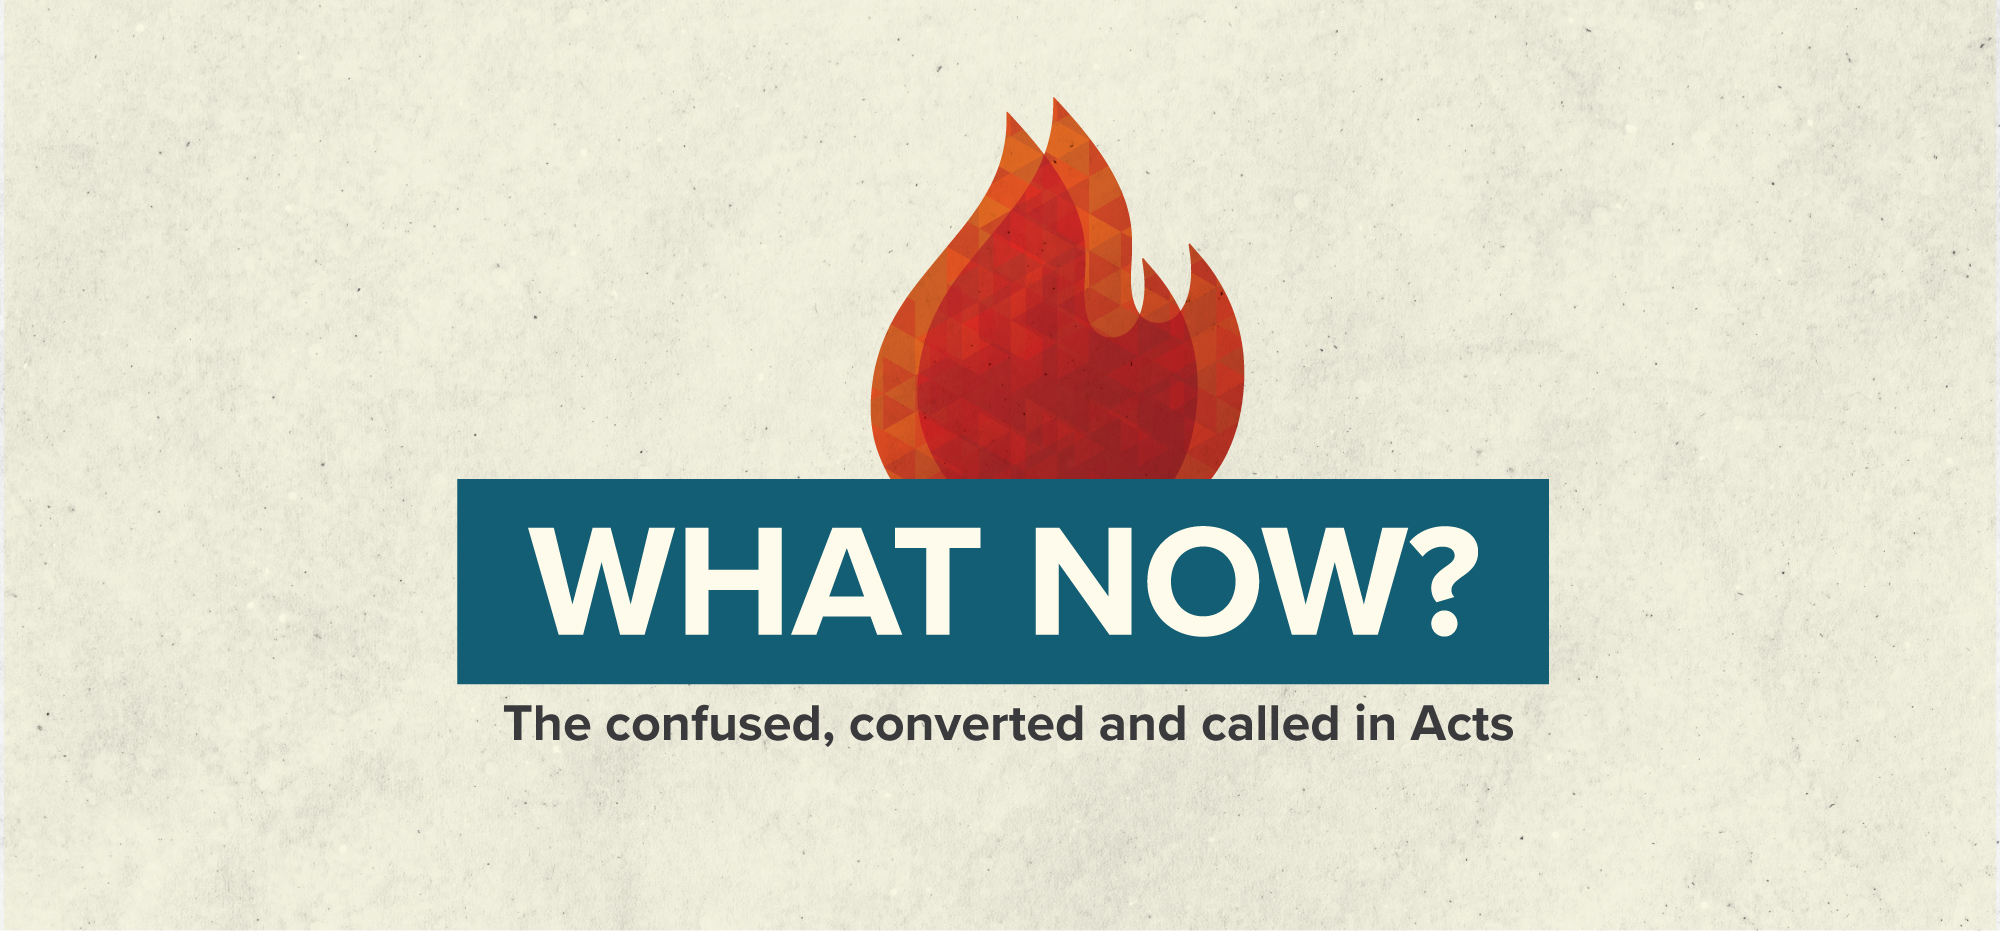 What Now? The converted, confused, and called in Acts.